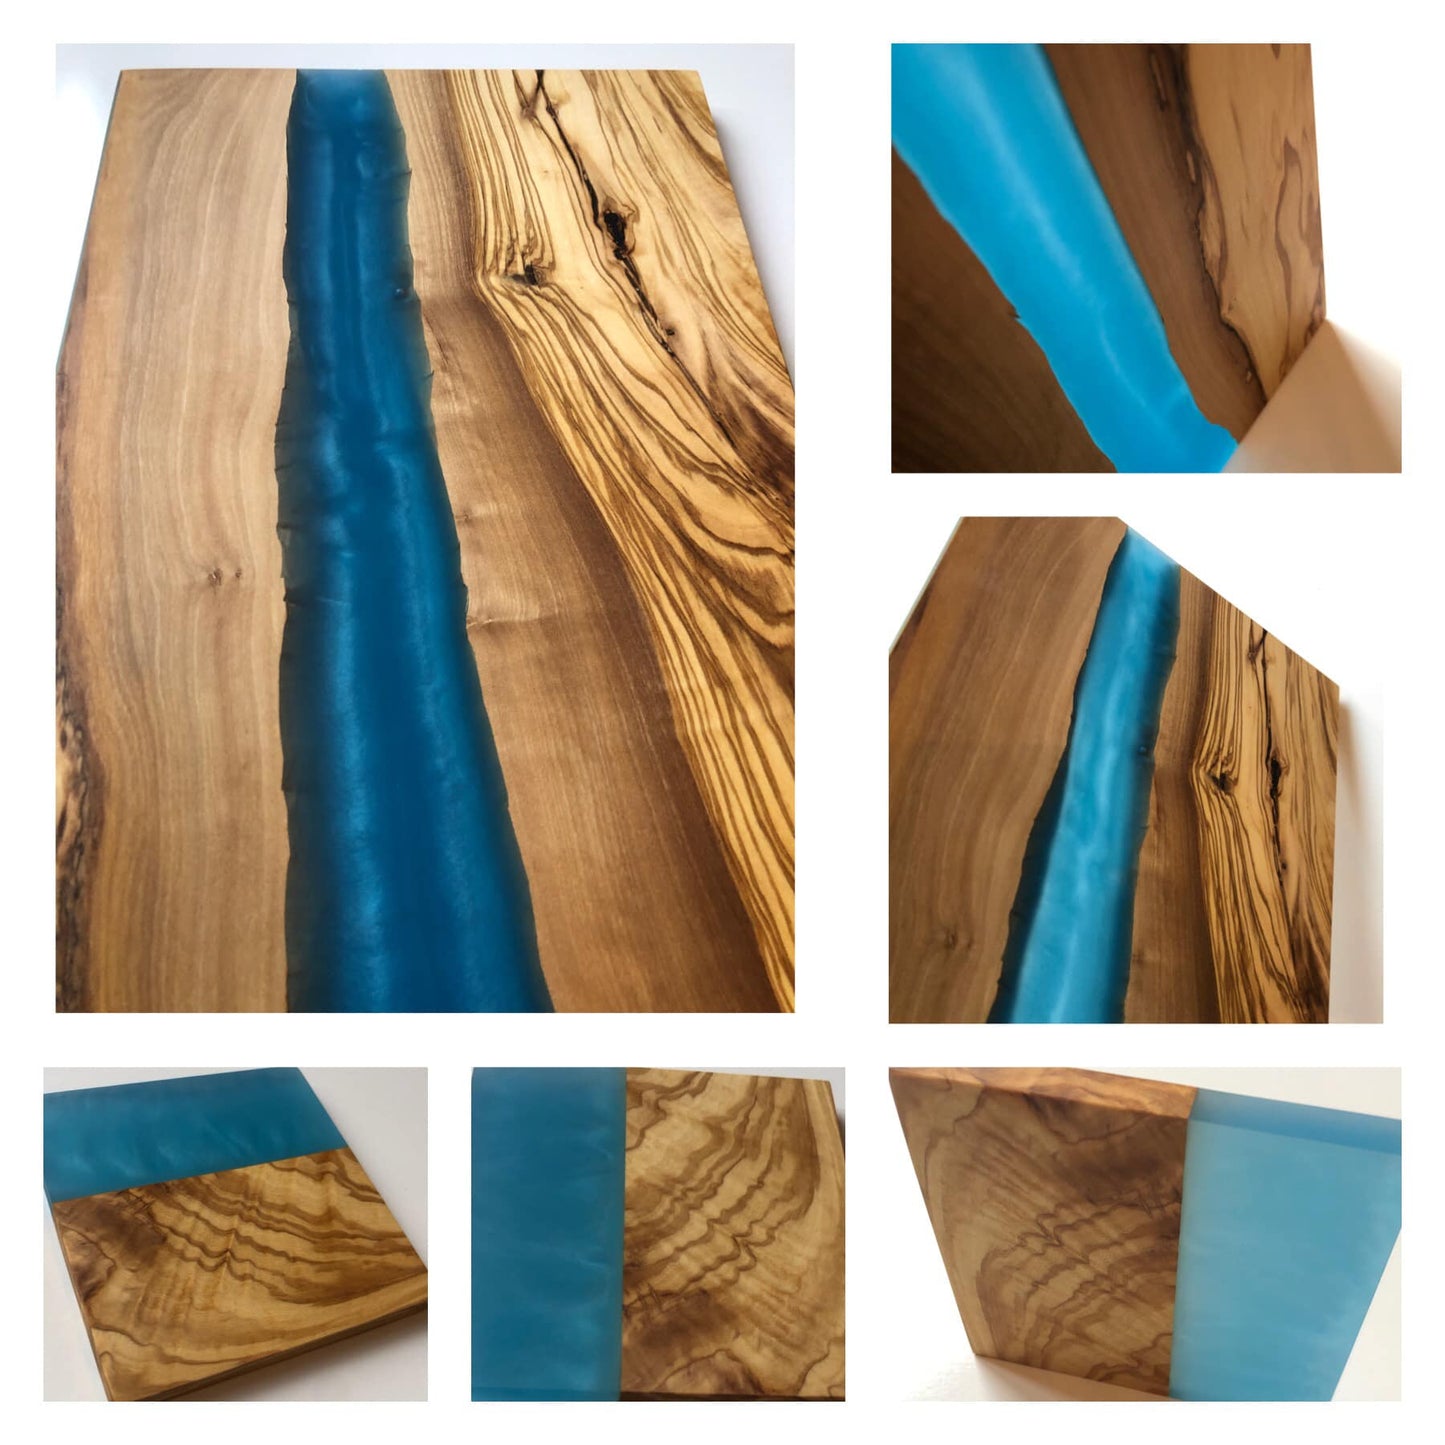 Case Rates - Pearly Blue Resin & Olive Wood - 46x23cm (18.1x9.06in) - Pennsylvania